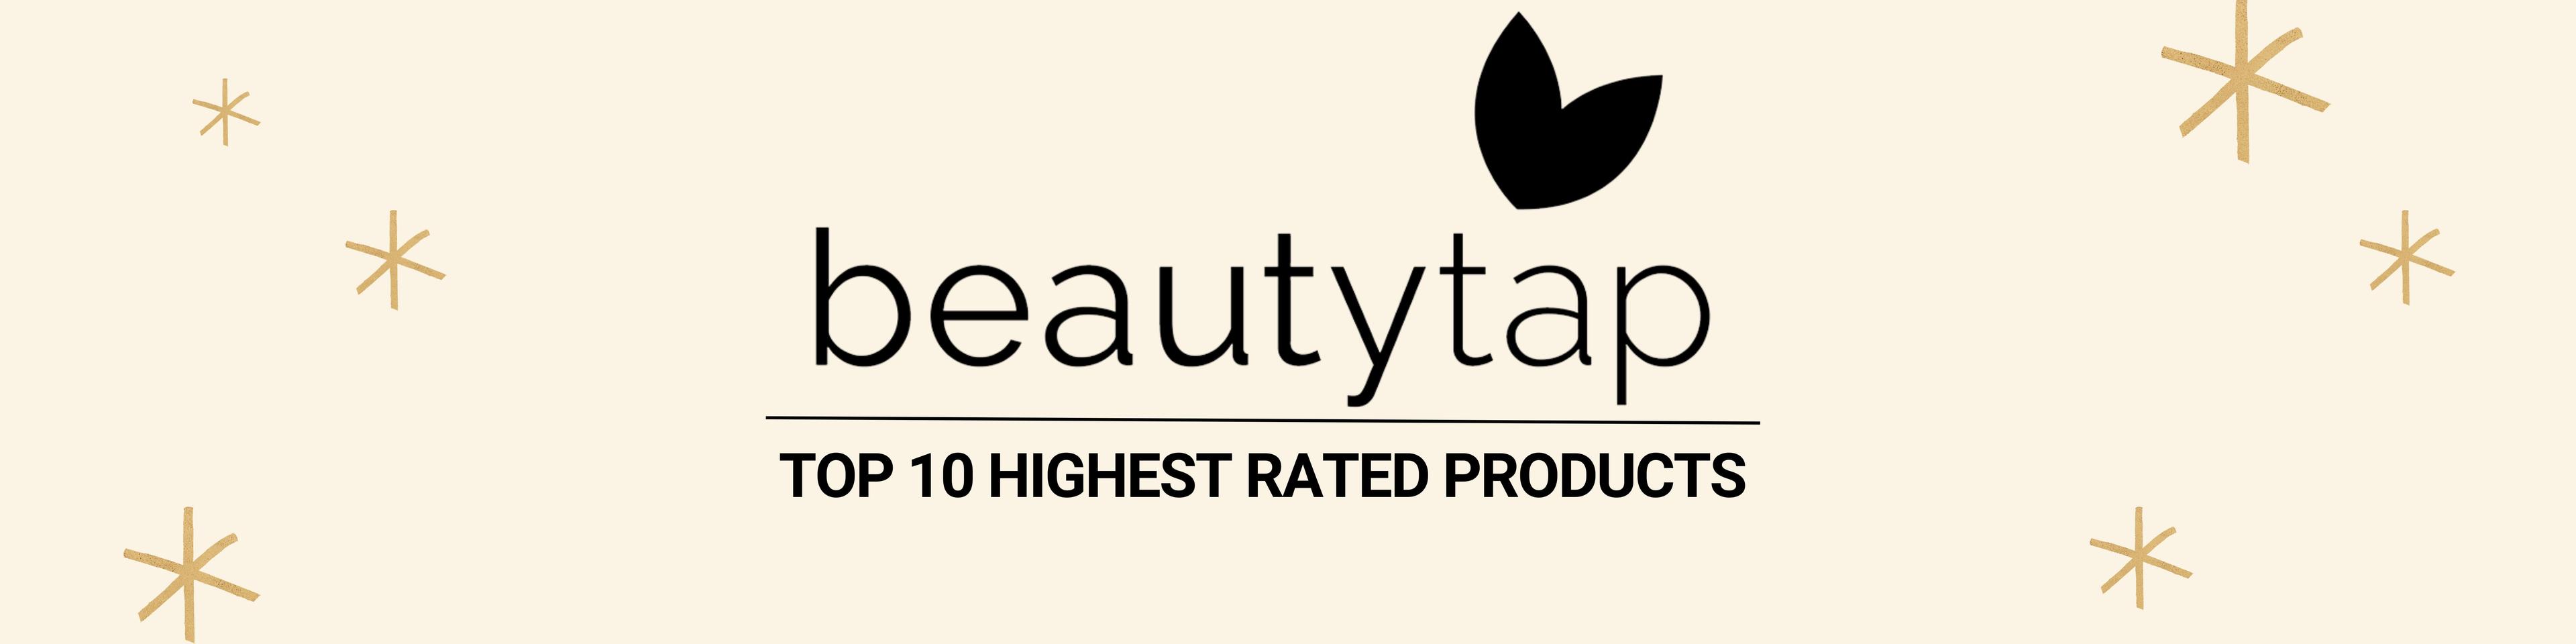 2022 Beautytap Awards – Top 10 Highest Rated Products by Category